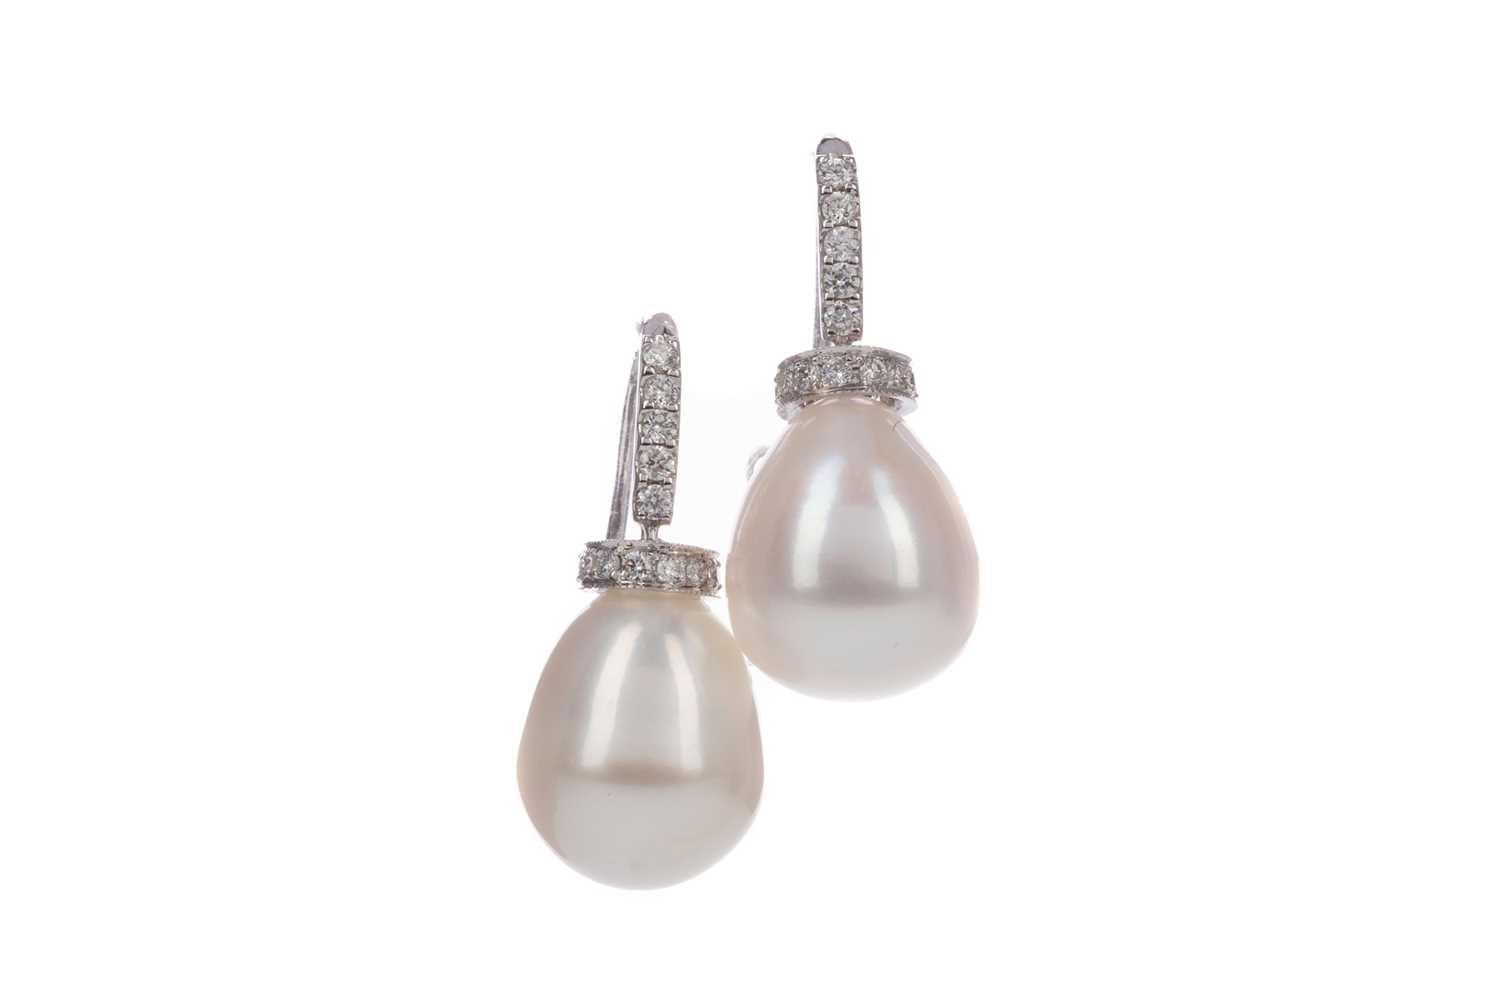 Lot 406 - A PAIR OF PEARL AND DIAMOND EARRINGS